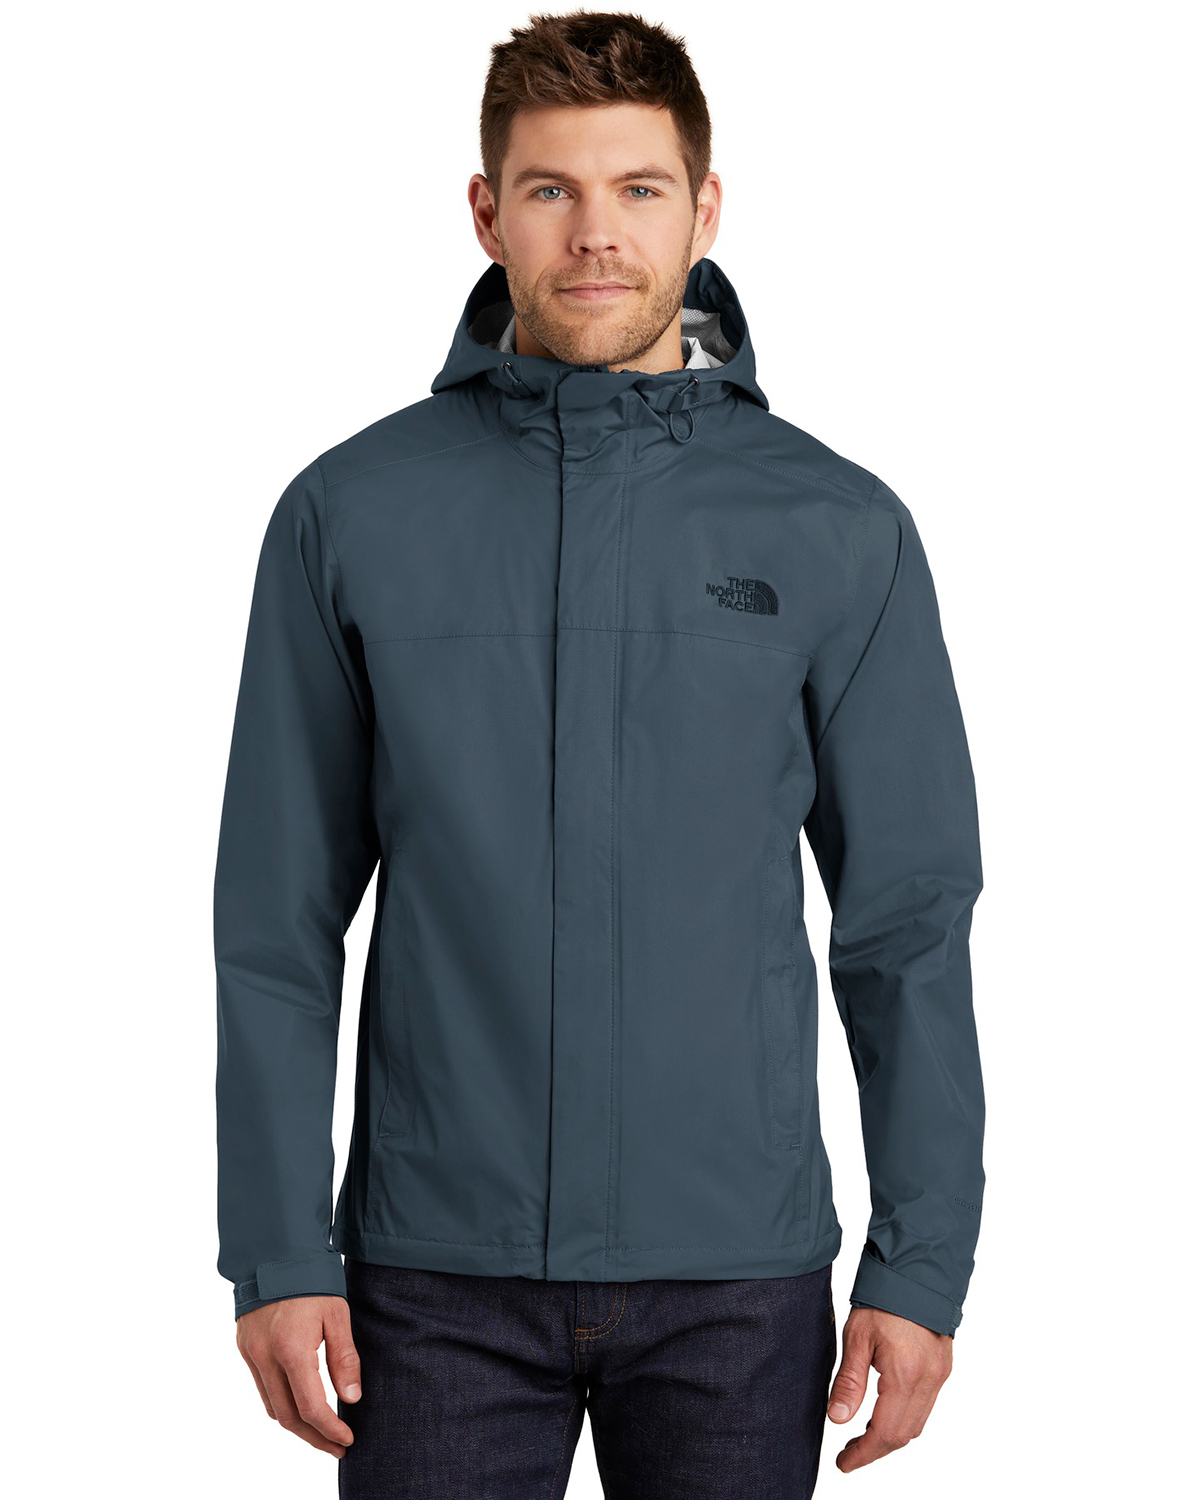 'The North Face NF0A3LH4 DryVent Rain Jacket'